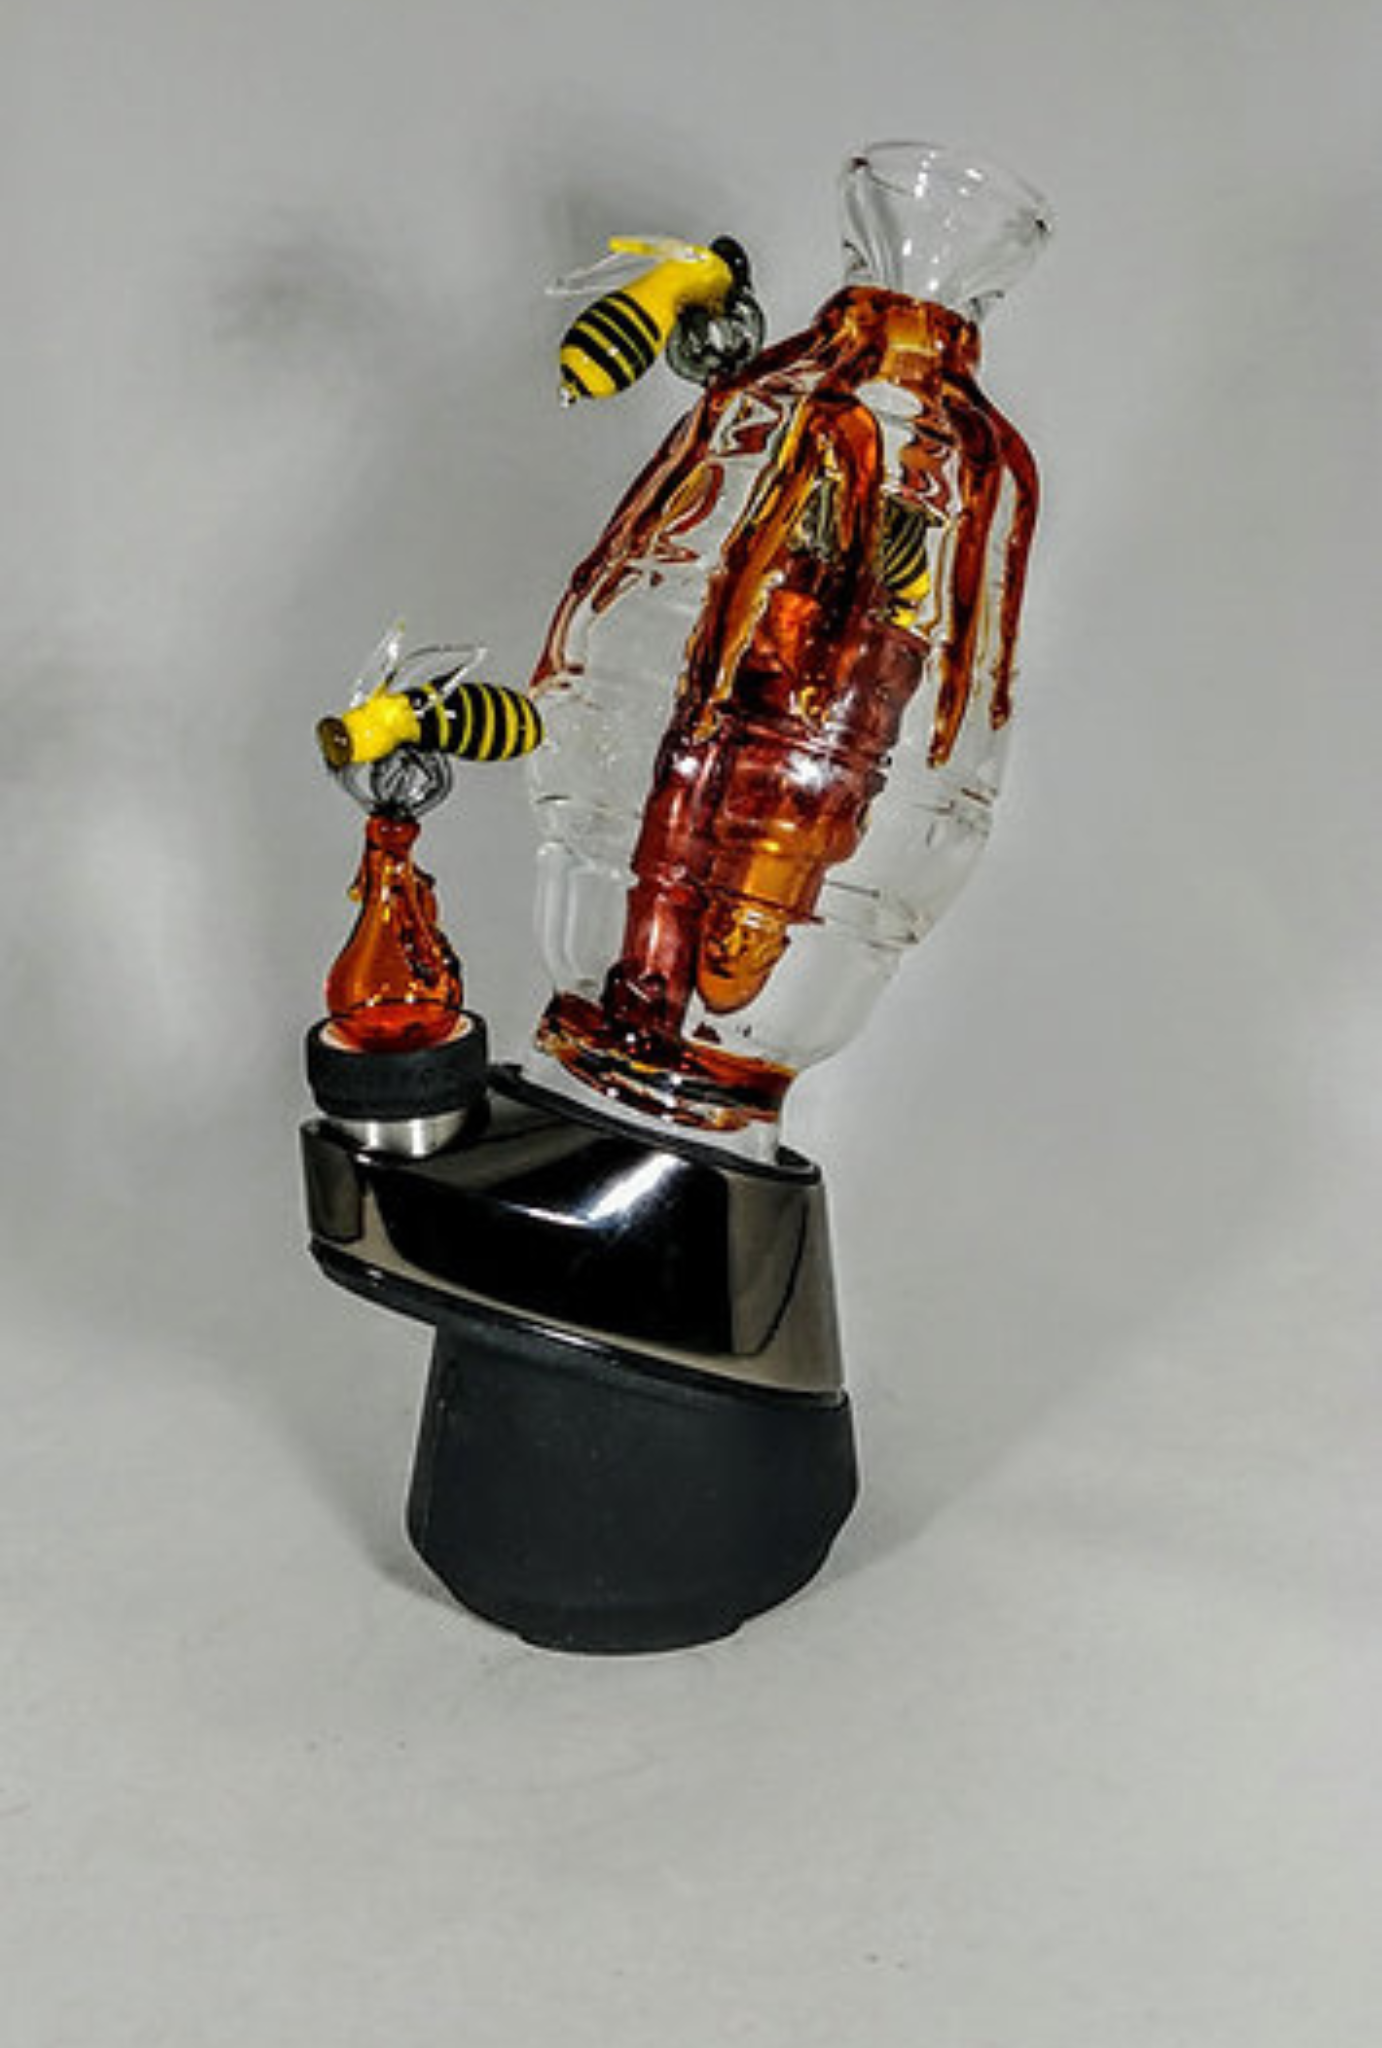 files/Beehive_Drip_With_Beez_Puffco_Attachment_with_LED_-_GiggleGlass-1199124.png